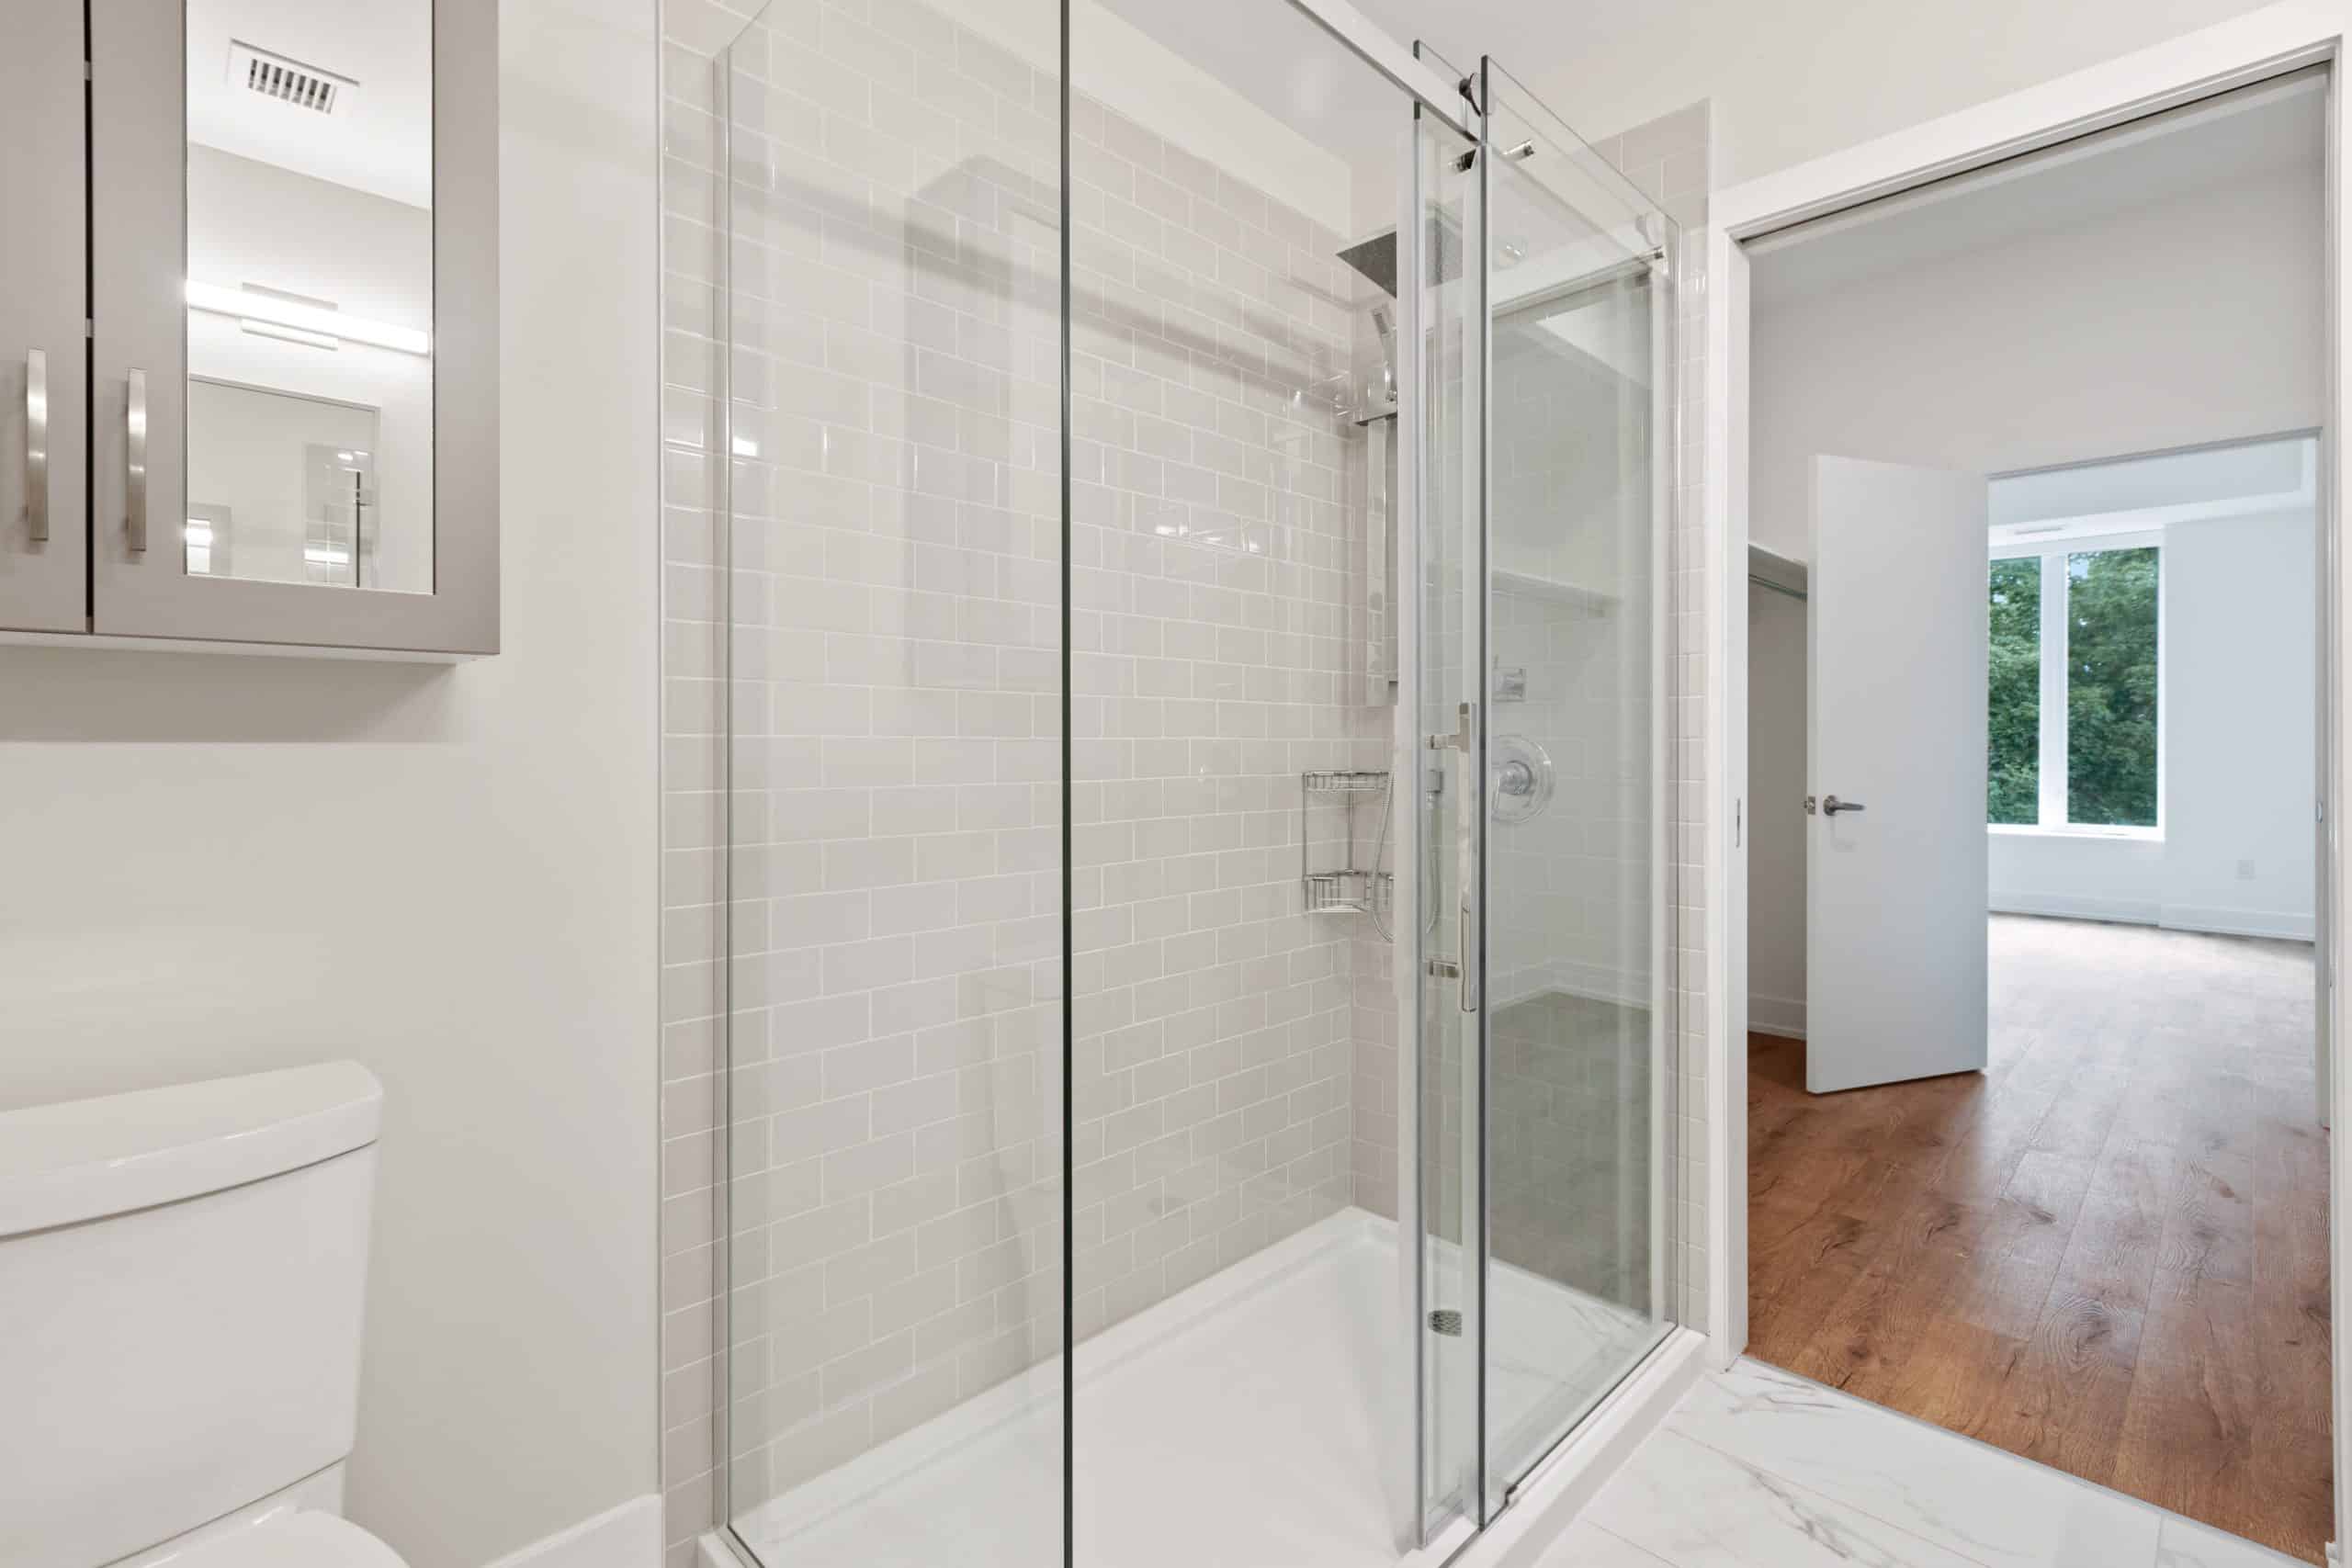 How to Clean Glass Shower Doors So They Are Streak-Free With The Simple Scrub featured image